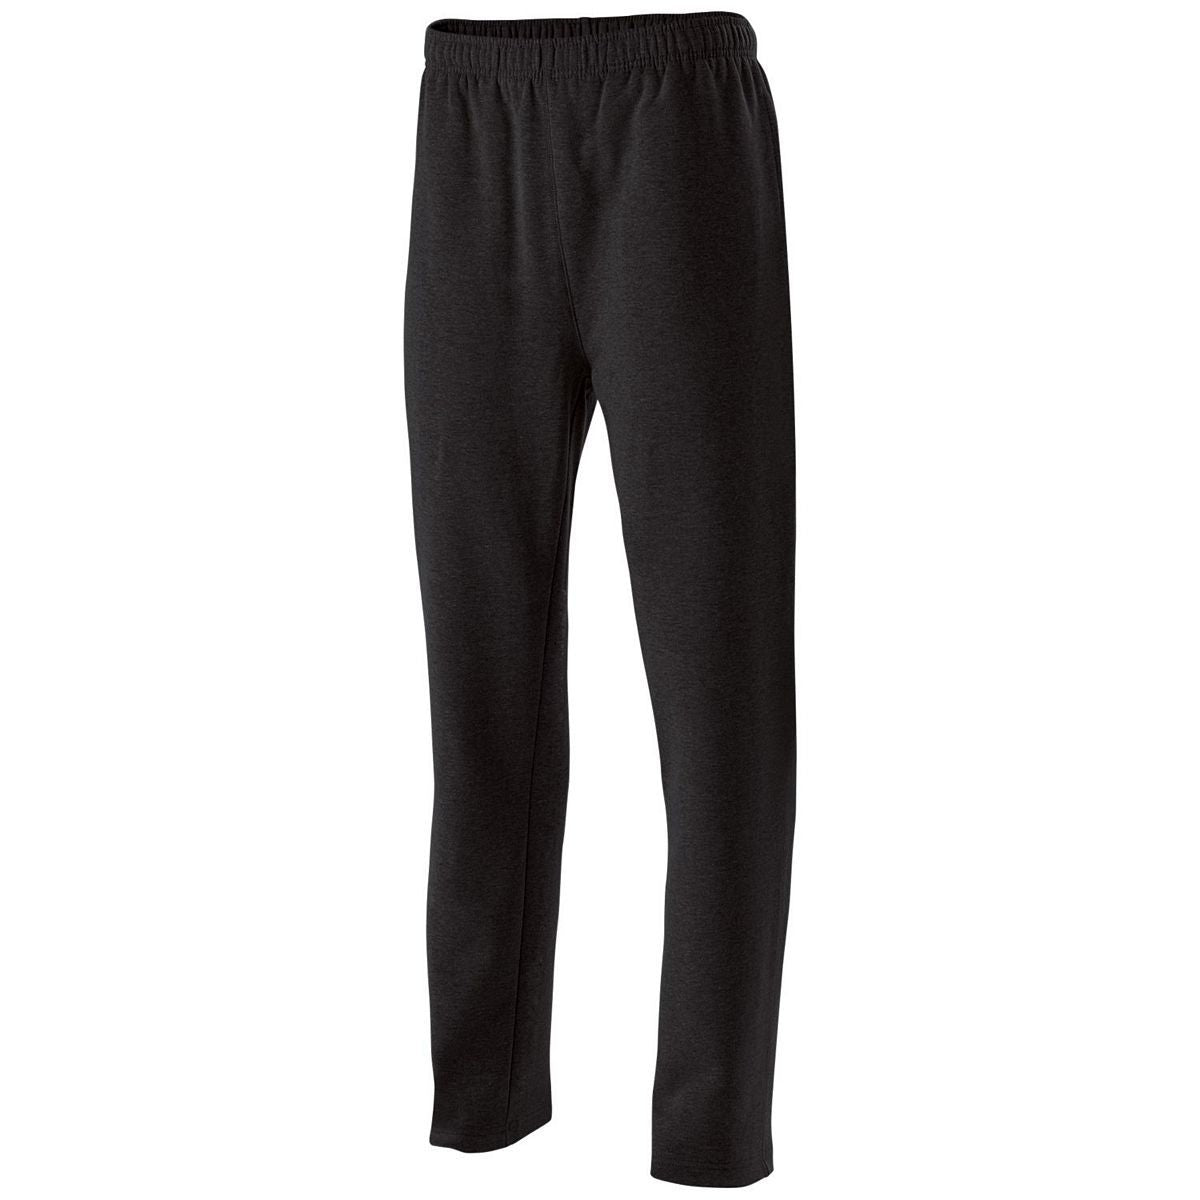 Holloway Youth 60/40 Fleece Pant in Black  -Part of the Youth, Youth-Pants, Pants, Holloway product lines at KanaleyCreations.com